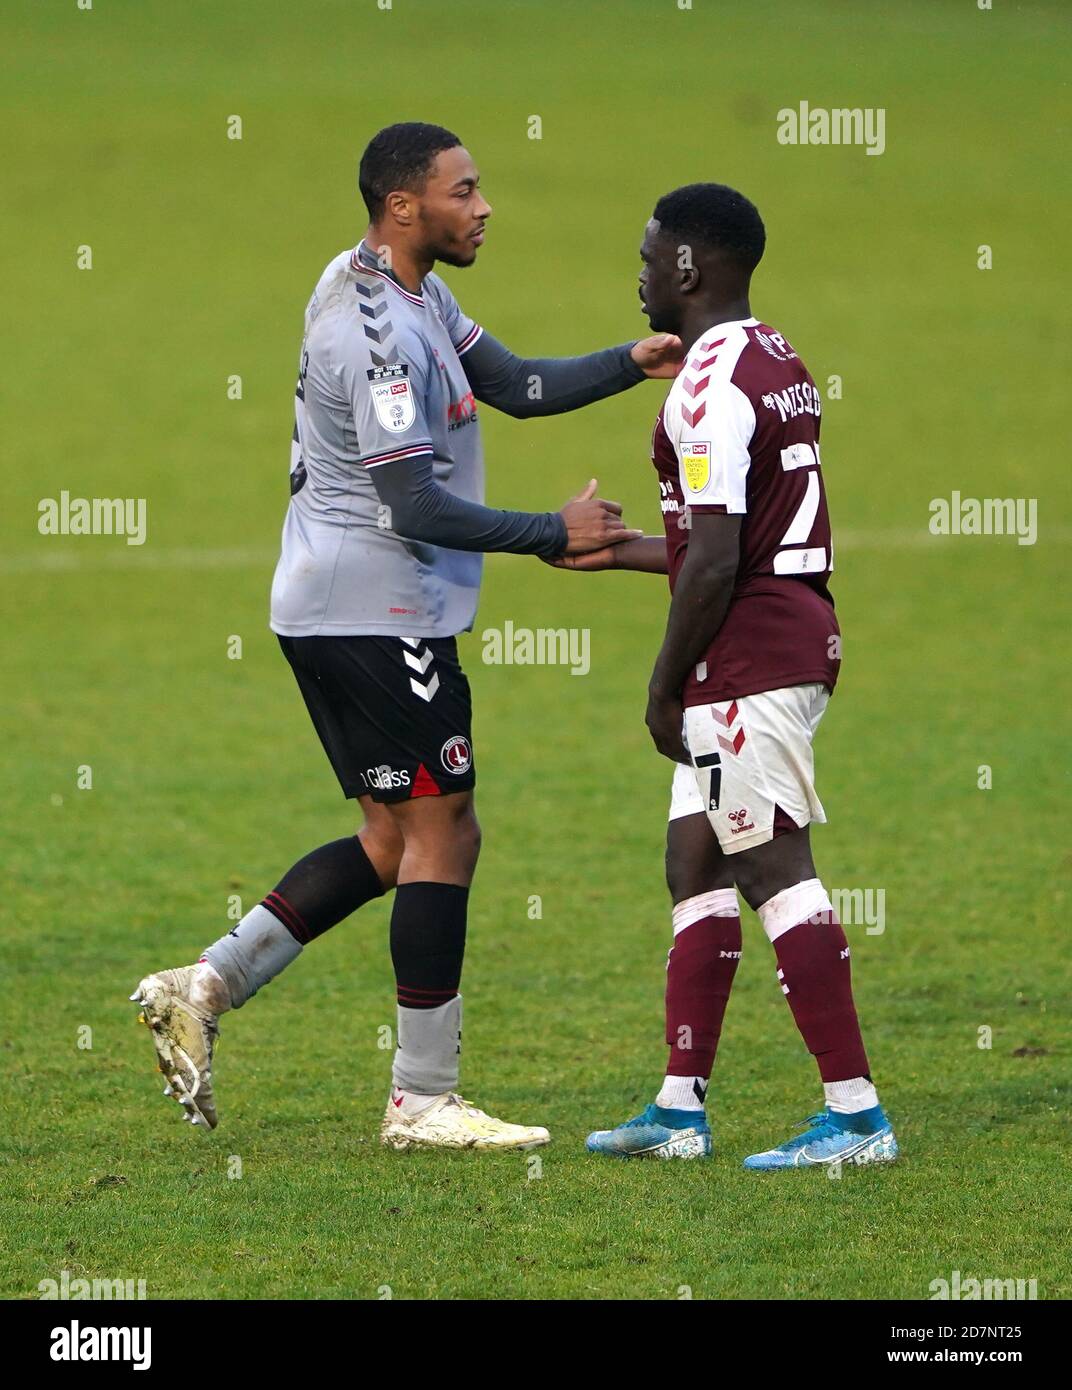 Charlton Athletic's Akin Famewo greets Northampton Town's Christopher Missilou after the final whistle during the Sky Bet League One match at the PTS Academy Stadium, Northampton. Stock Photo